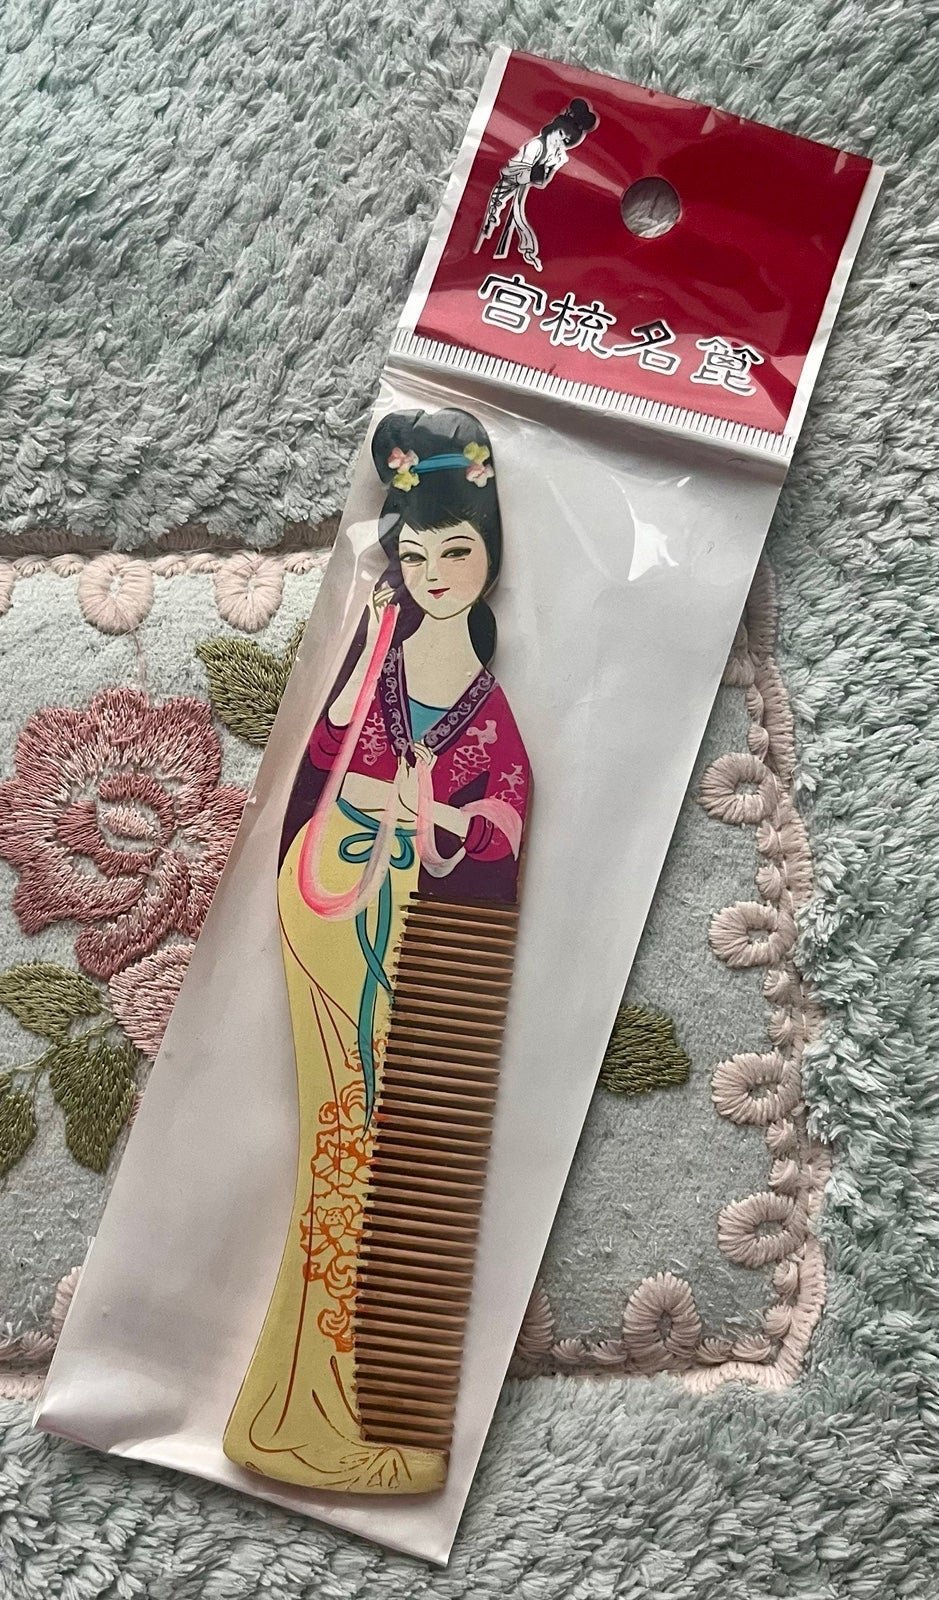 NEW vintage wooden Changzhou comb with Chinese princess